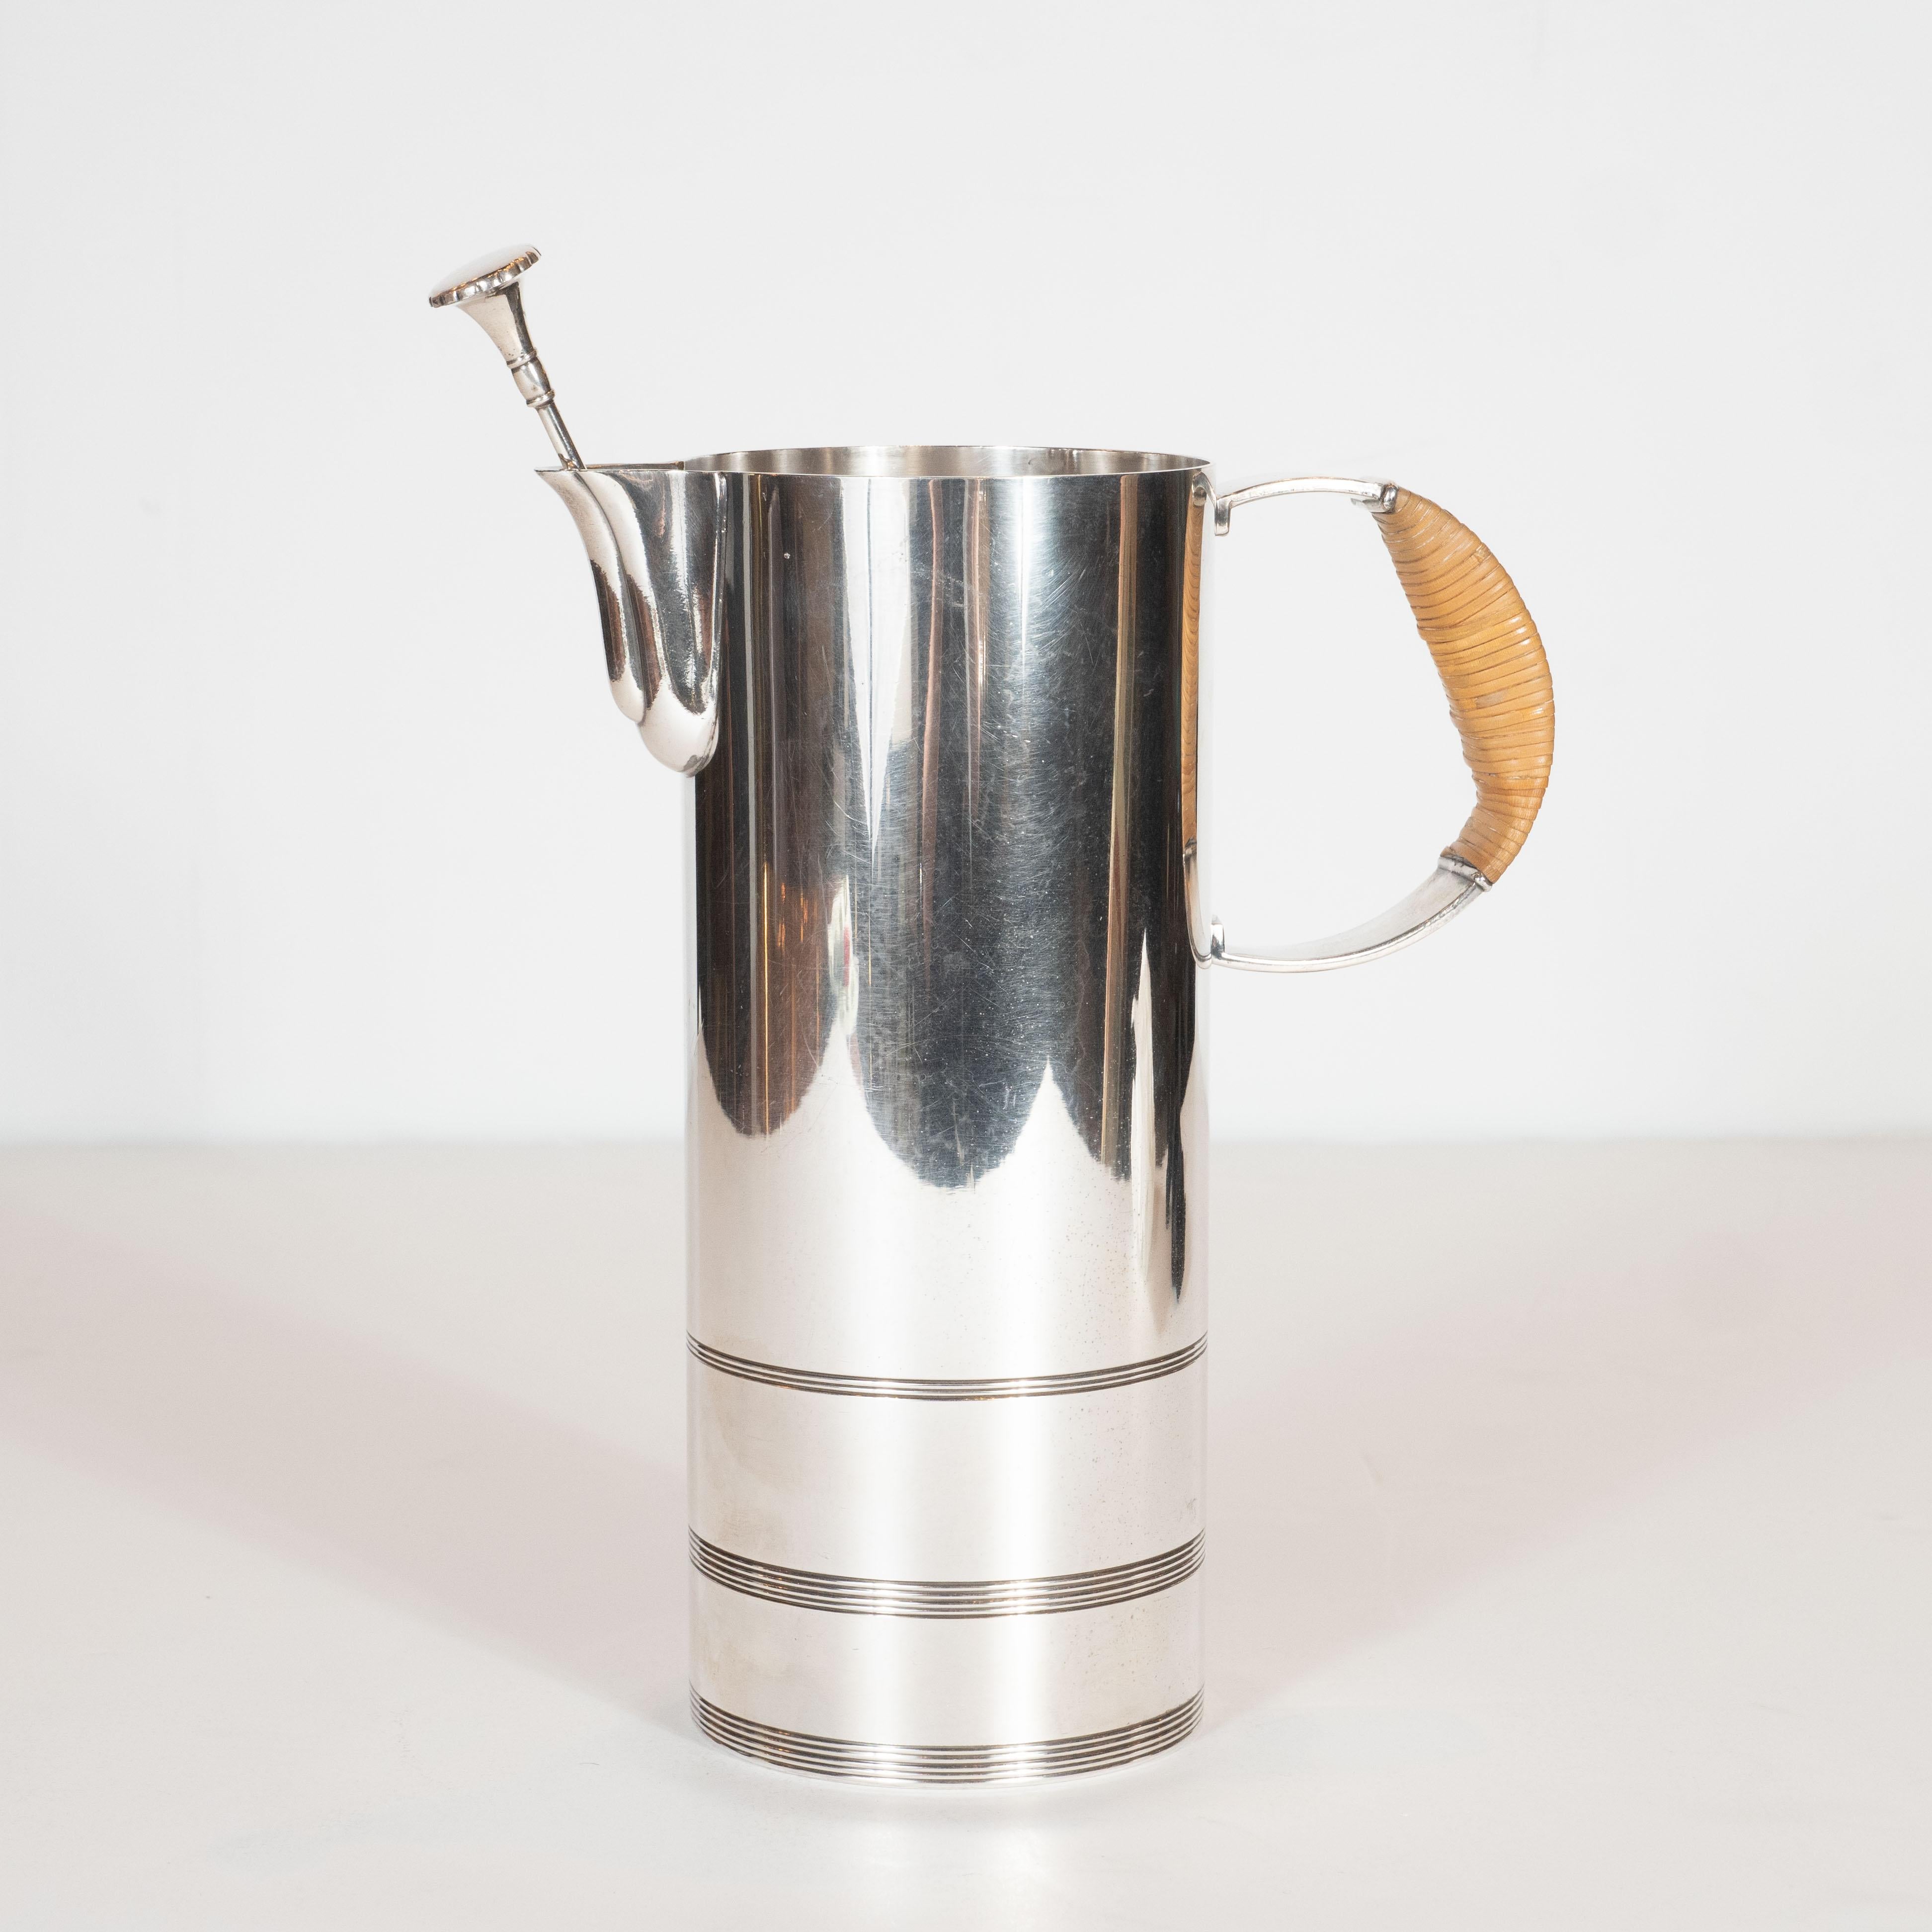 This stunning Art Deco cocktail pitcher was realized by the renowned architect, industrial designer and interior designer Lurelle Van Arsdale Guild in America, circa 1940. It features a cylindrical body with three sets of etched horizontal banding